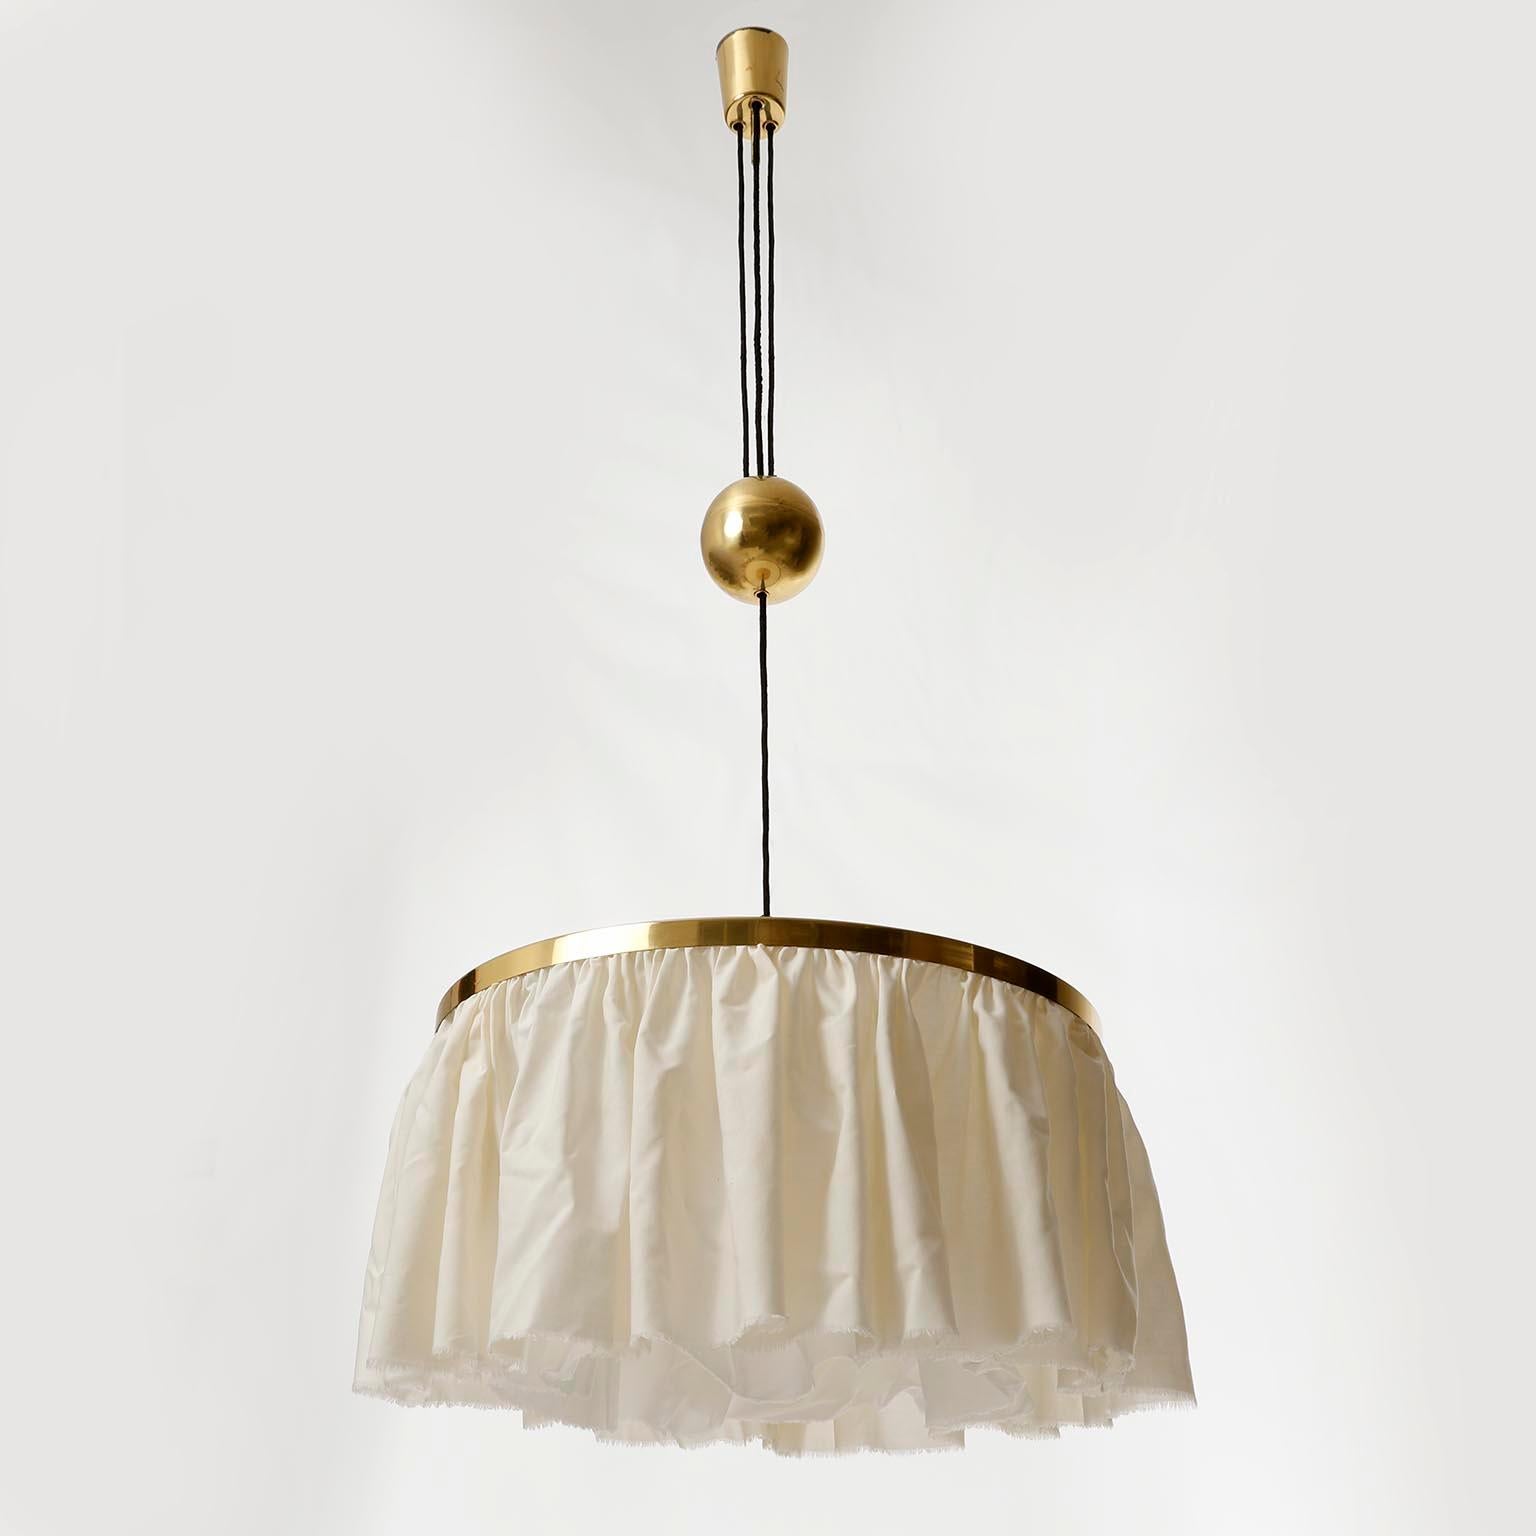 One of two height adjustable brass counter balance pendant lamps by J.T. Kalmar manufactured in midcentury in 1950s.
The design is attributed to Adolf Loos or Josef Frank. Both as well as Josef Hoffmann used this kind of lamps for their interior